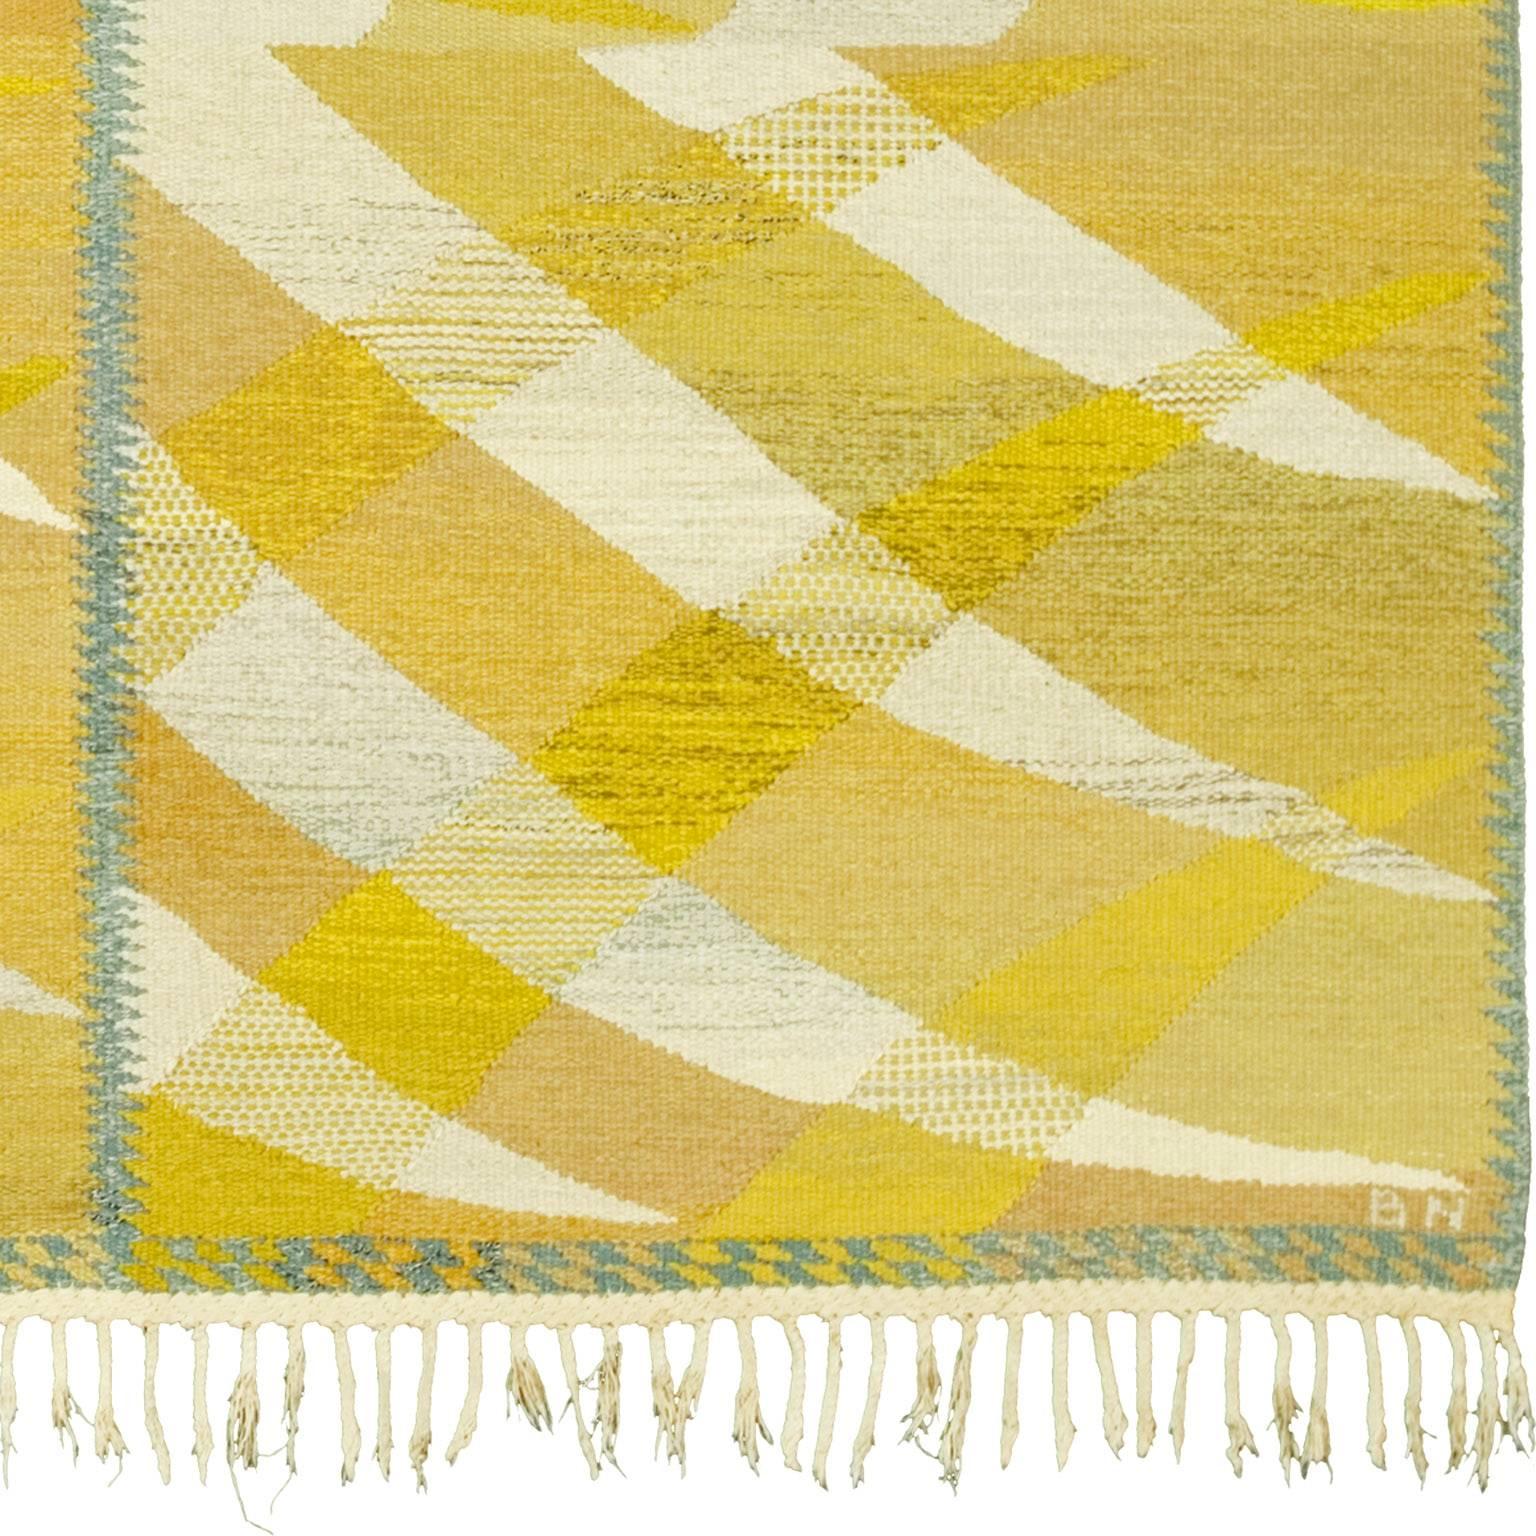 Swedish Flat-Weave Carpet by Barbro Nilsson, 1964 In Good Condition For Sale In New York, NY